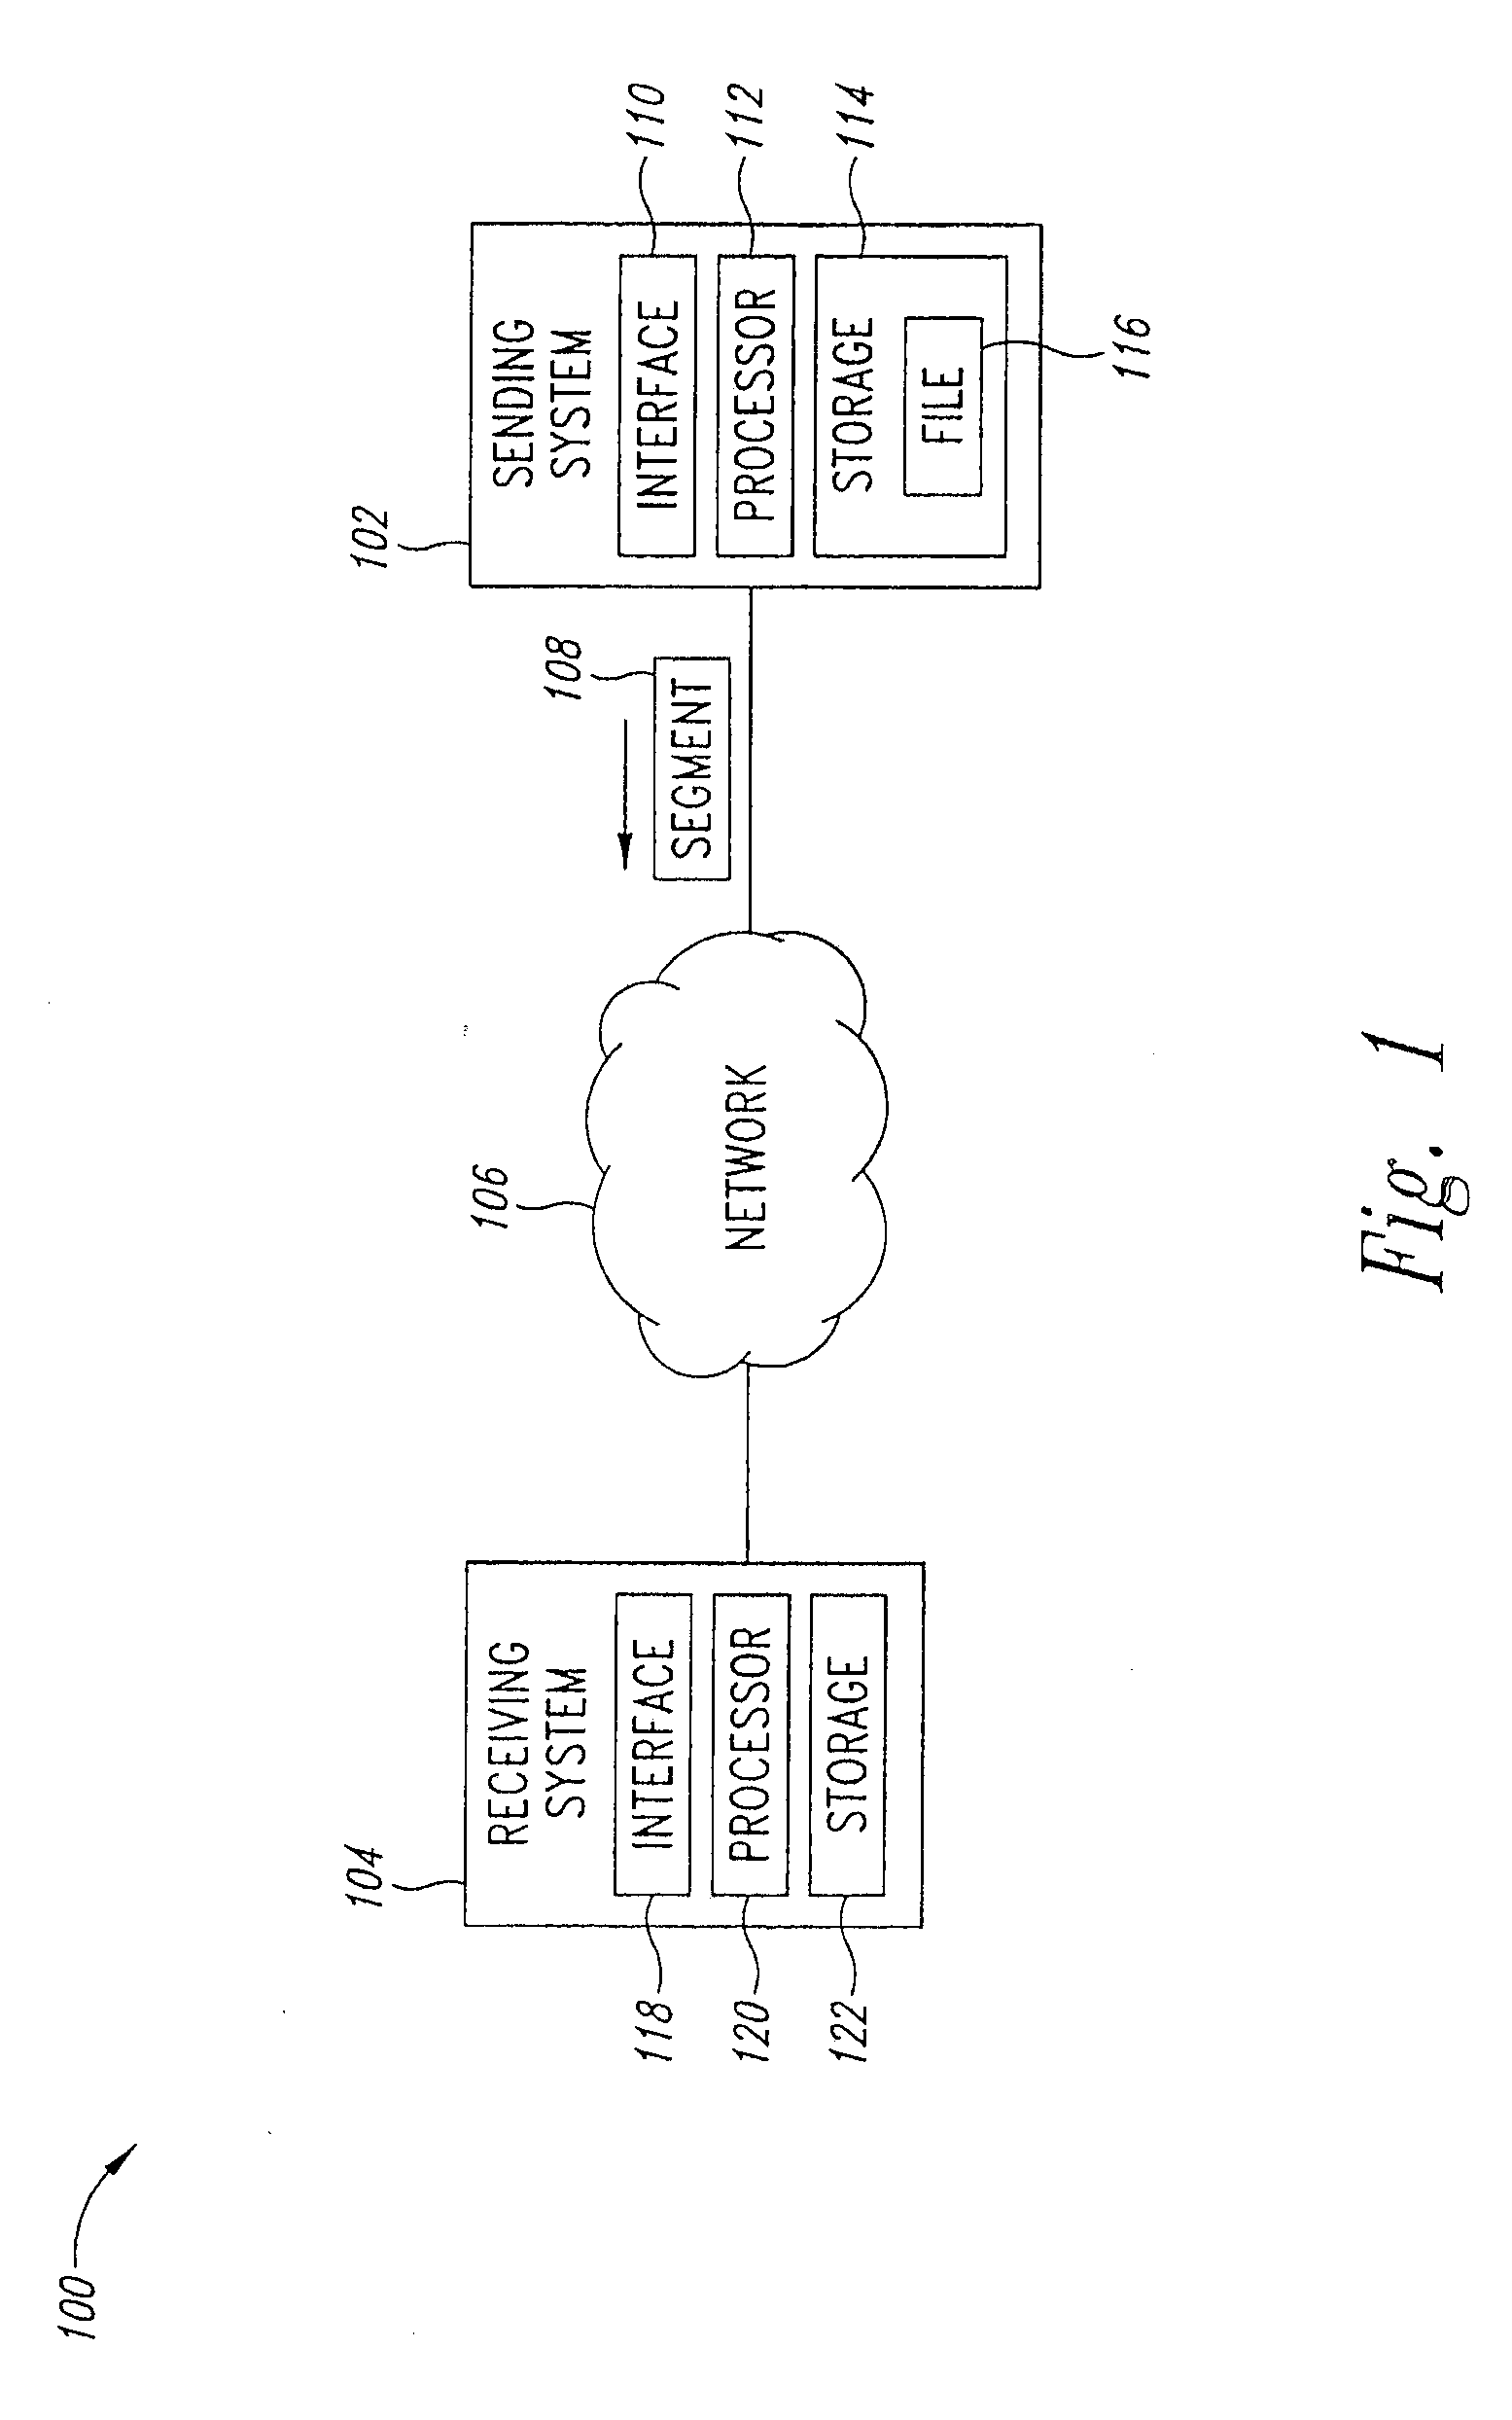 System and method for peak flow detection in a communication network